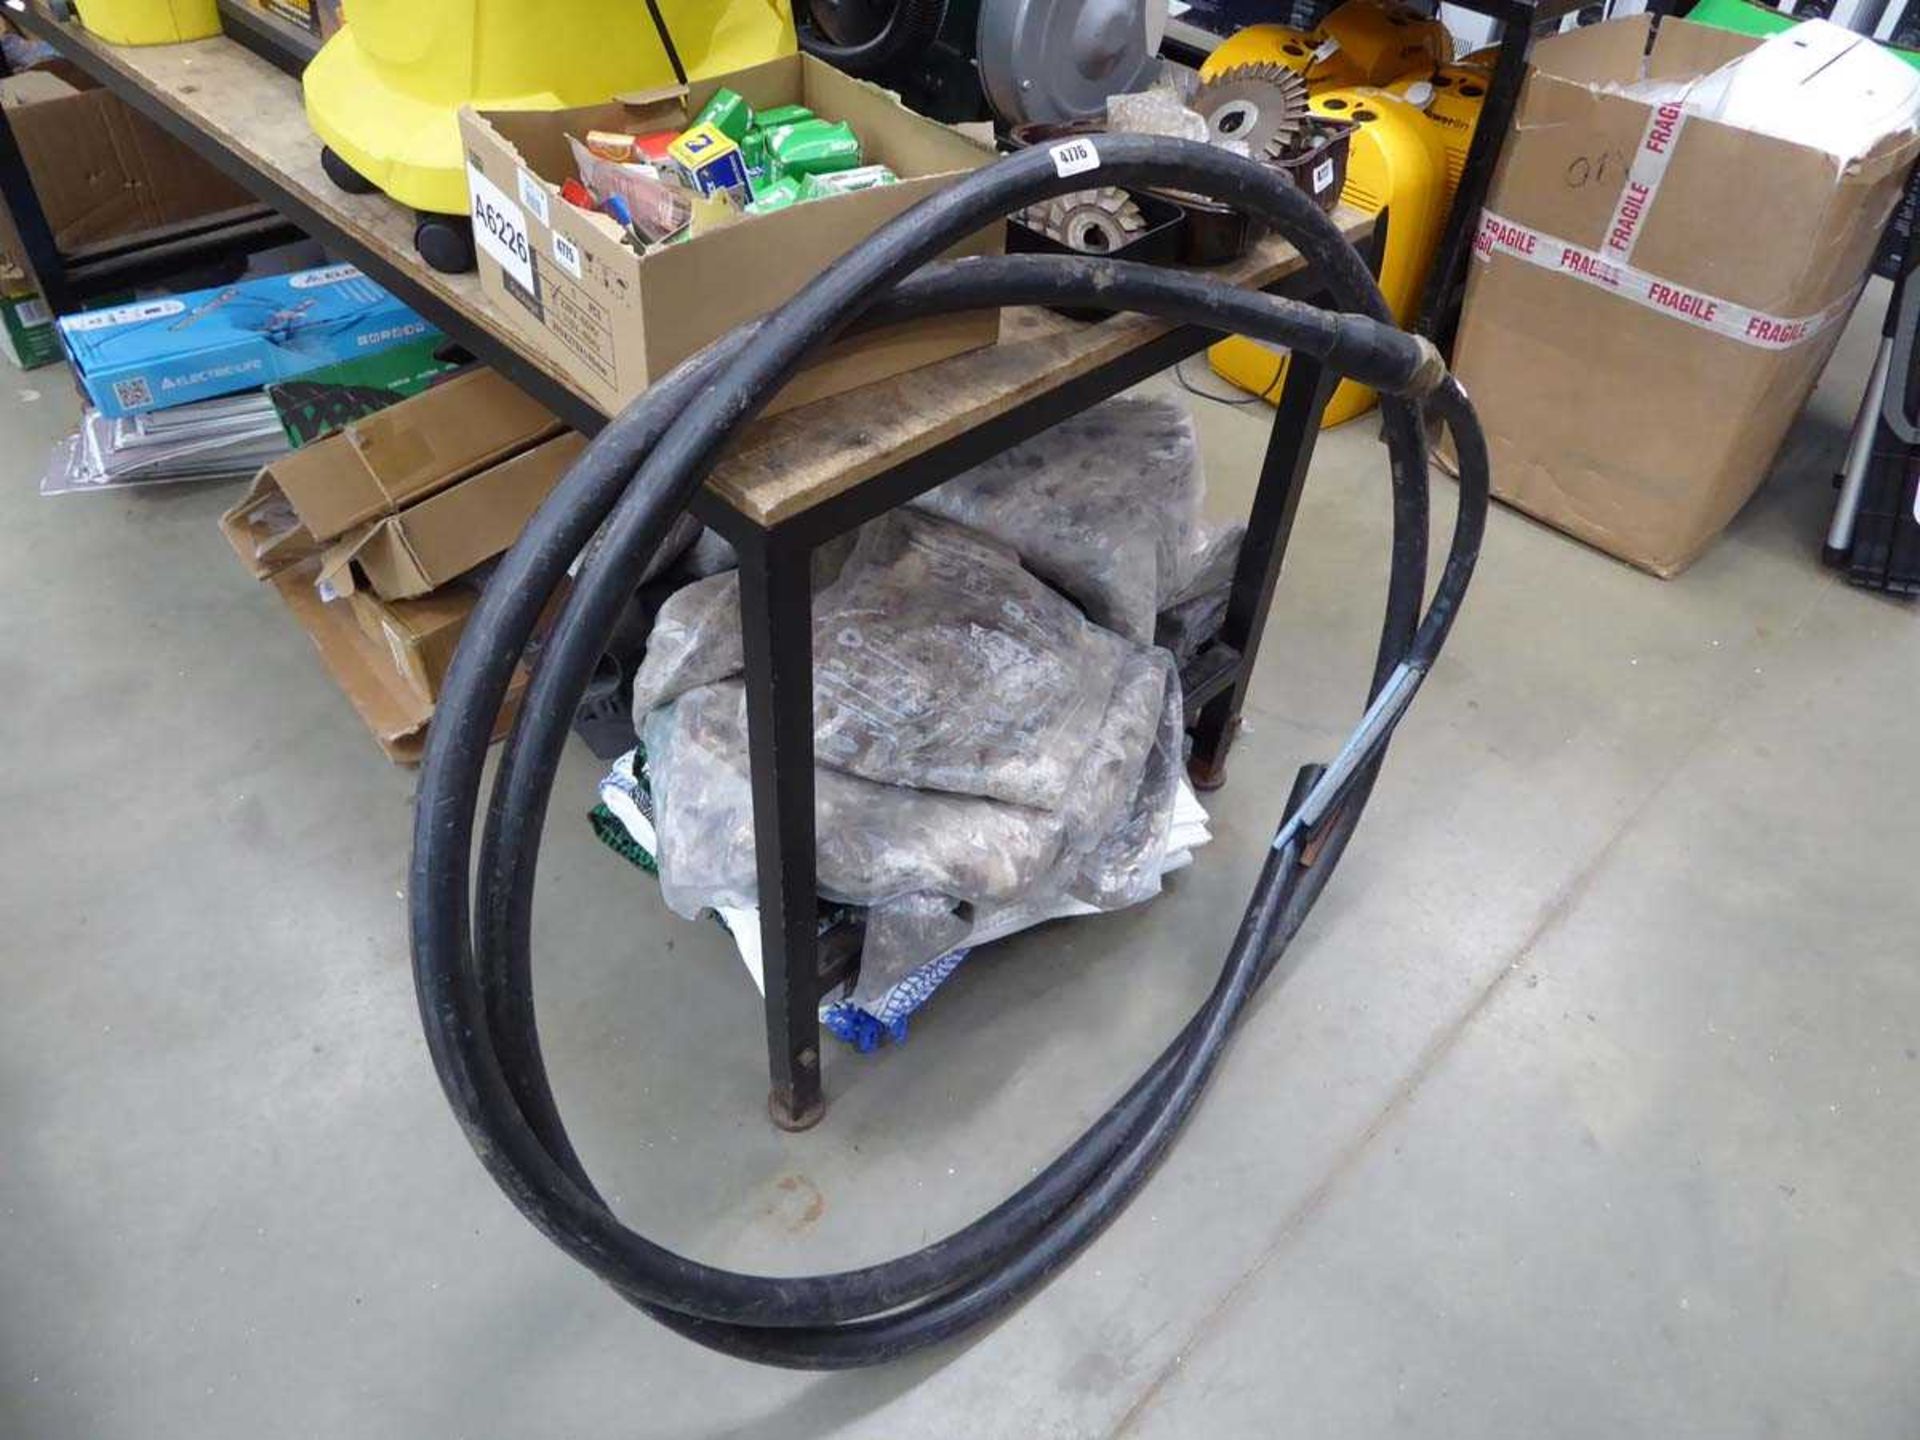 Large heavy duty cable